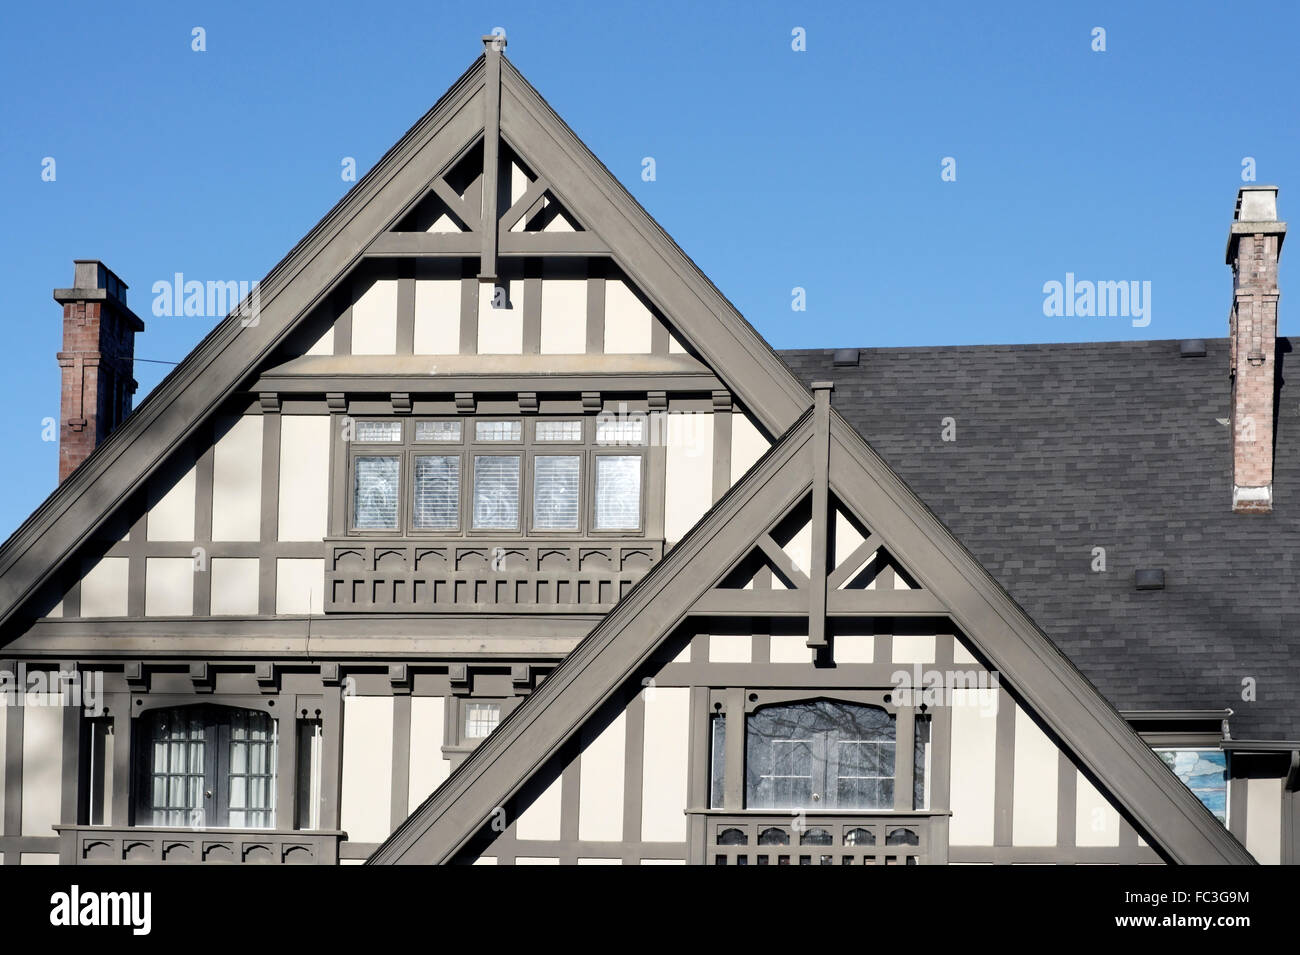 Facade of a large Tudor Revival style house in Shaughnessy neighbourhood in the city of Vancouver, BC, Canada Stock Photo